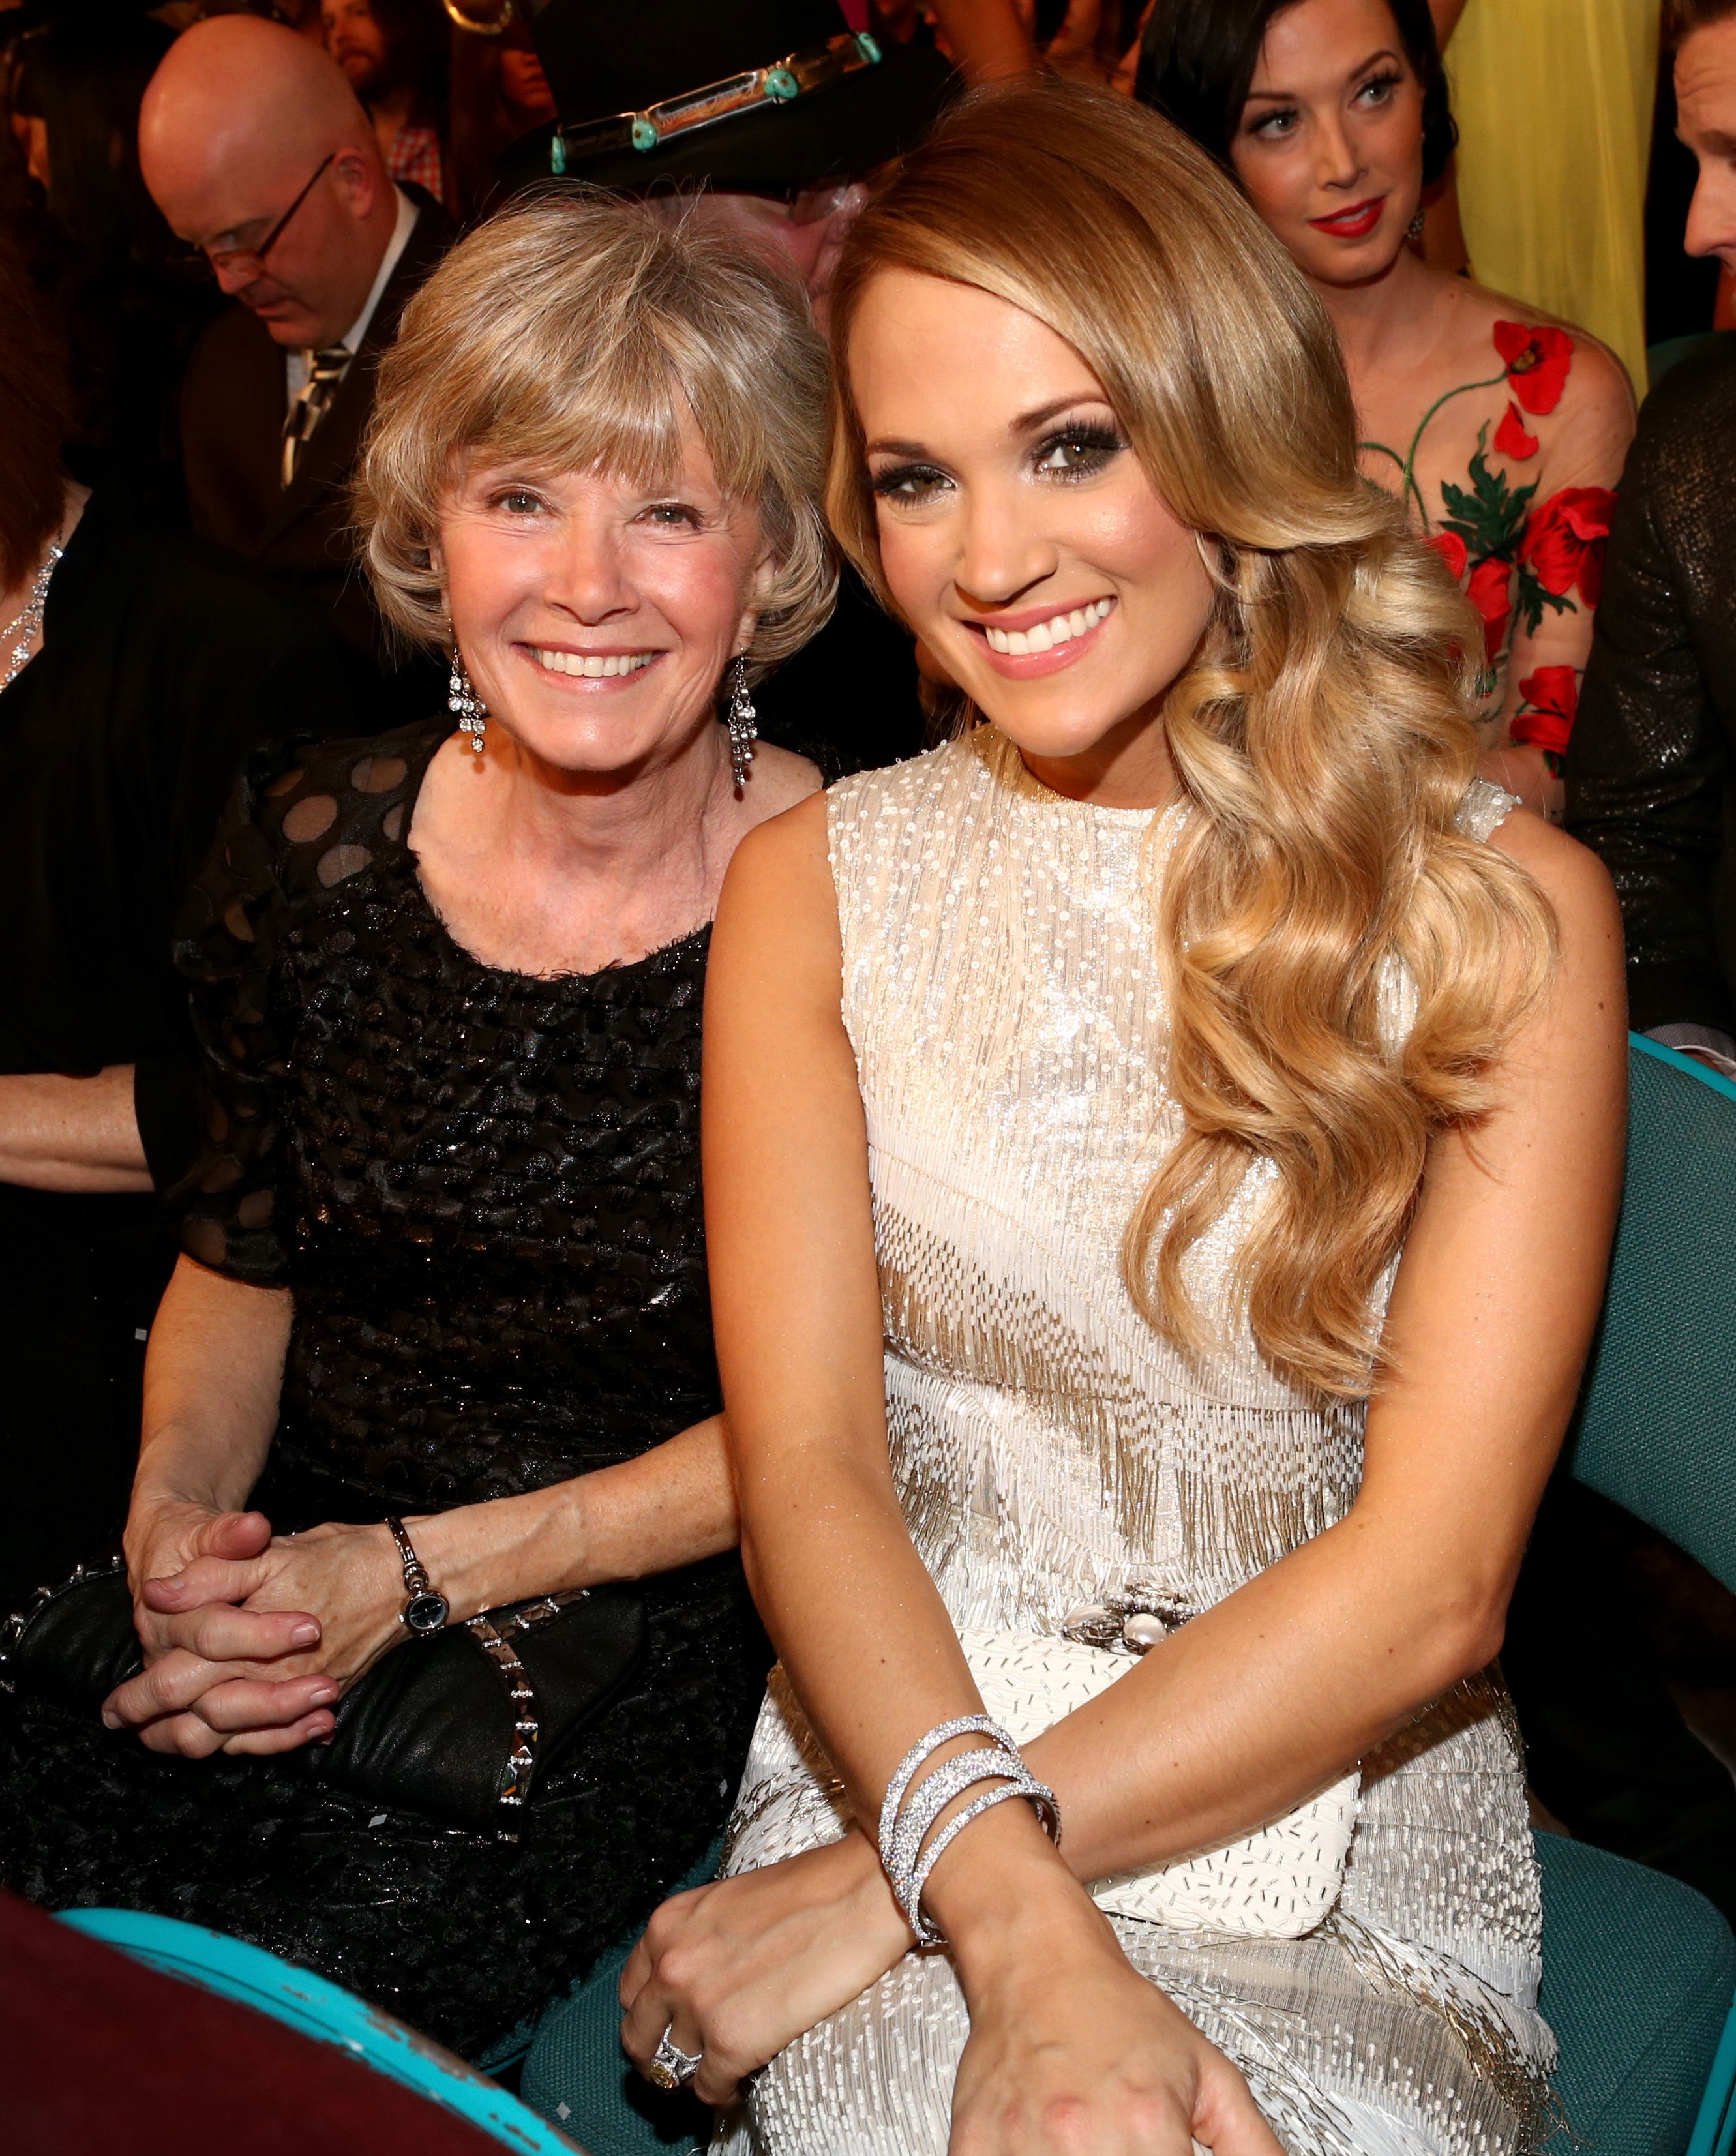 Carrie Underwood and Carole Underwood at the 49th Annual Academy of Country Music Awards at the MGM Grand Garden Arena on April 6, 2014 | Photo: Getty Images